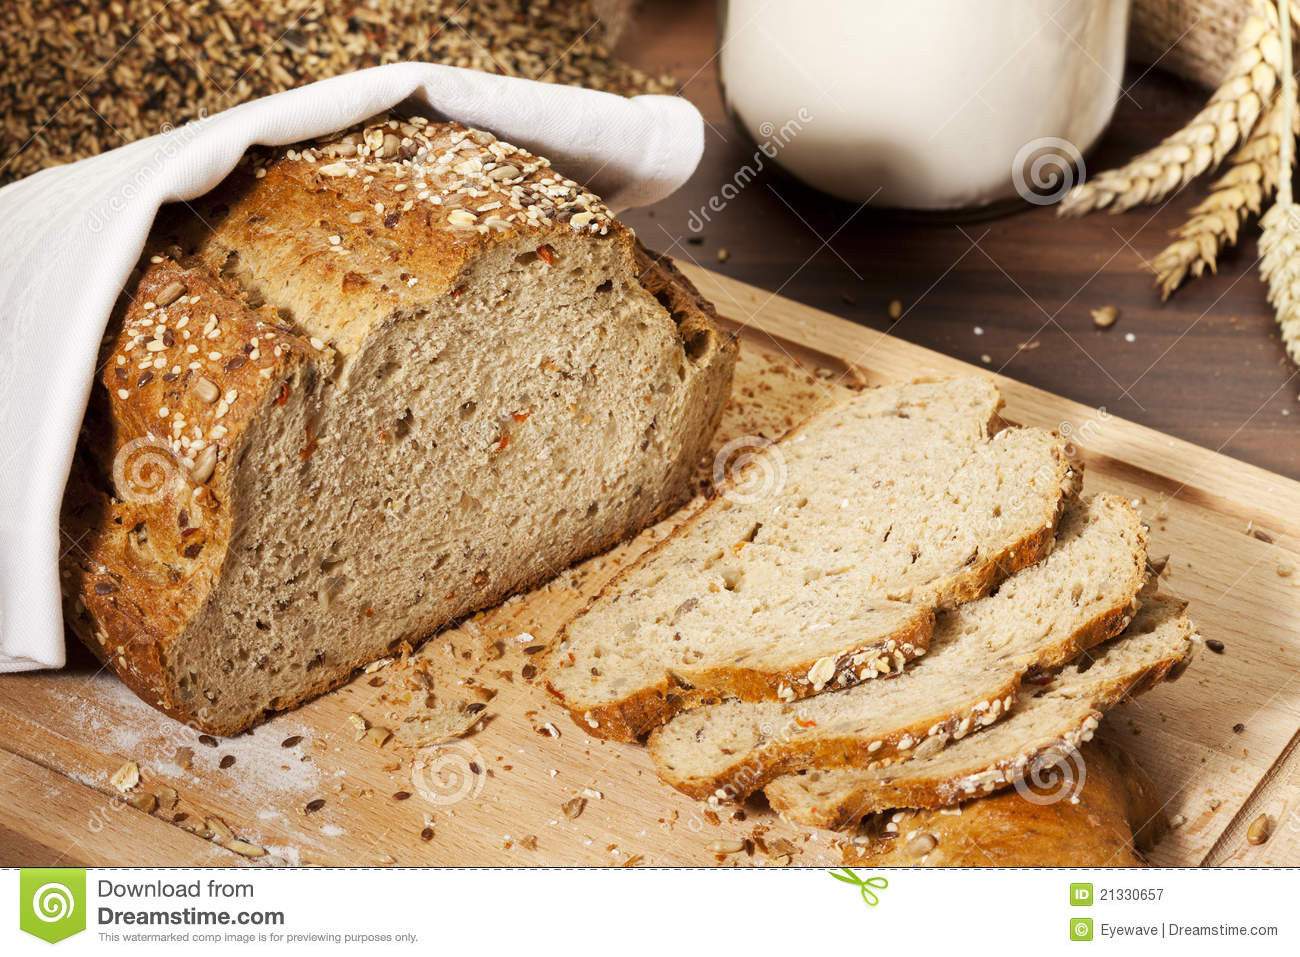 Organic Whole Grain Bread
 Organic Whole Grain Bread Loaf And Slices Stock Image